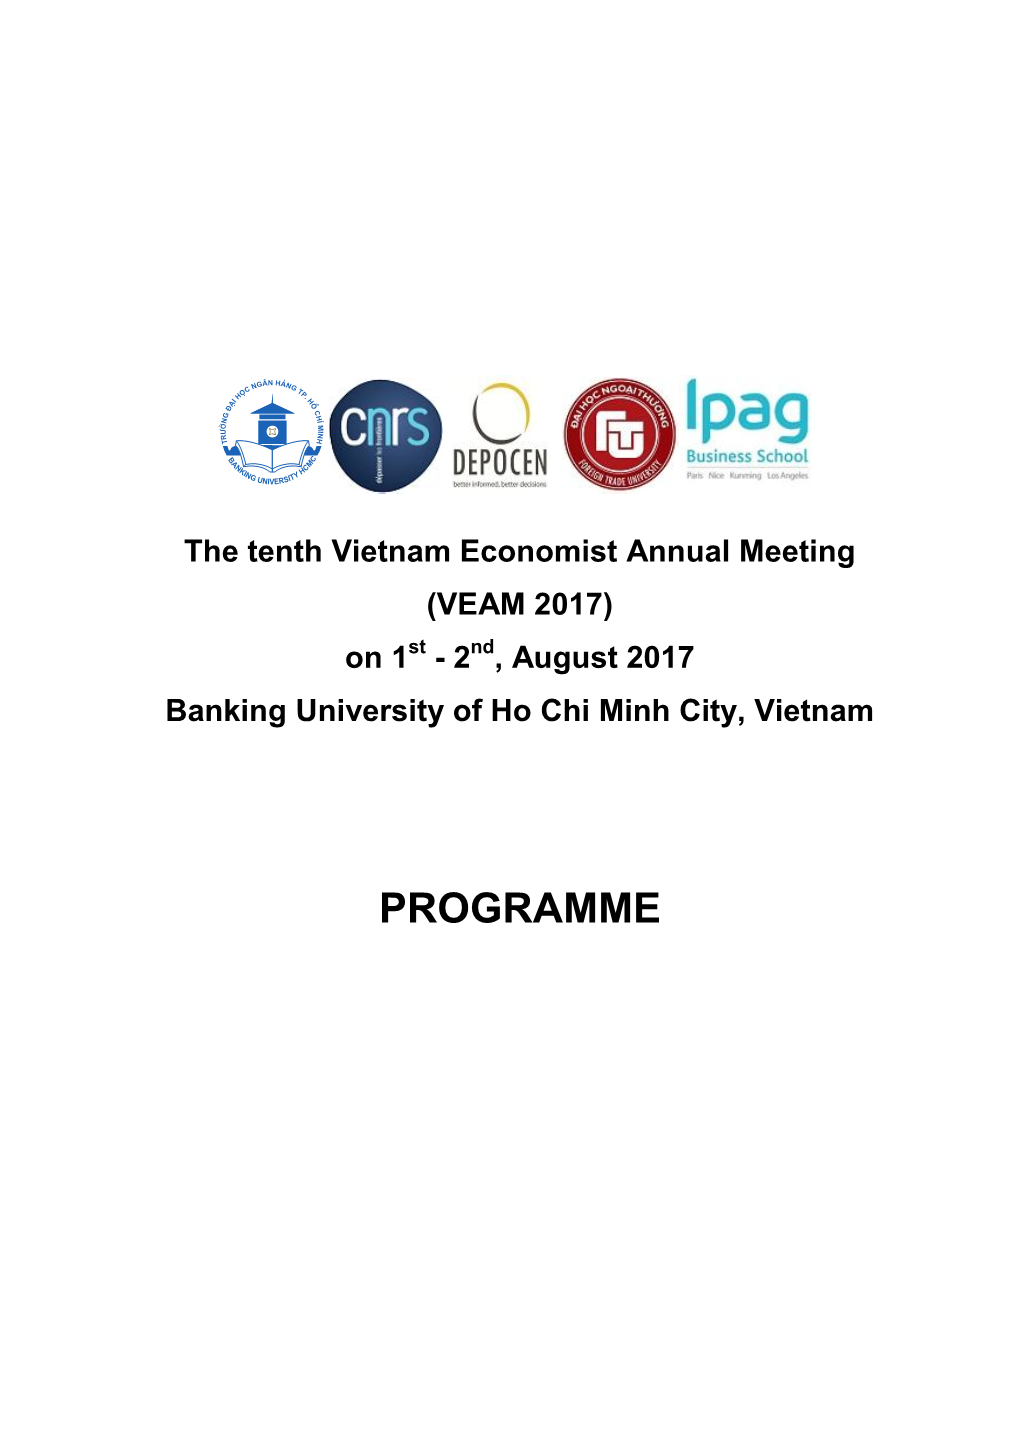 2017) on 1St - 2Nd, August 2017 Banking University of Ho Chi Minh City, Vietnam